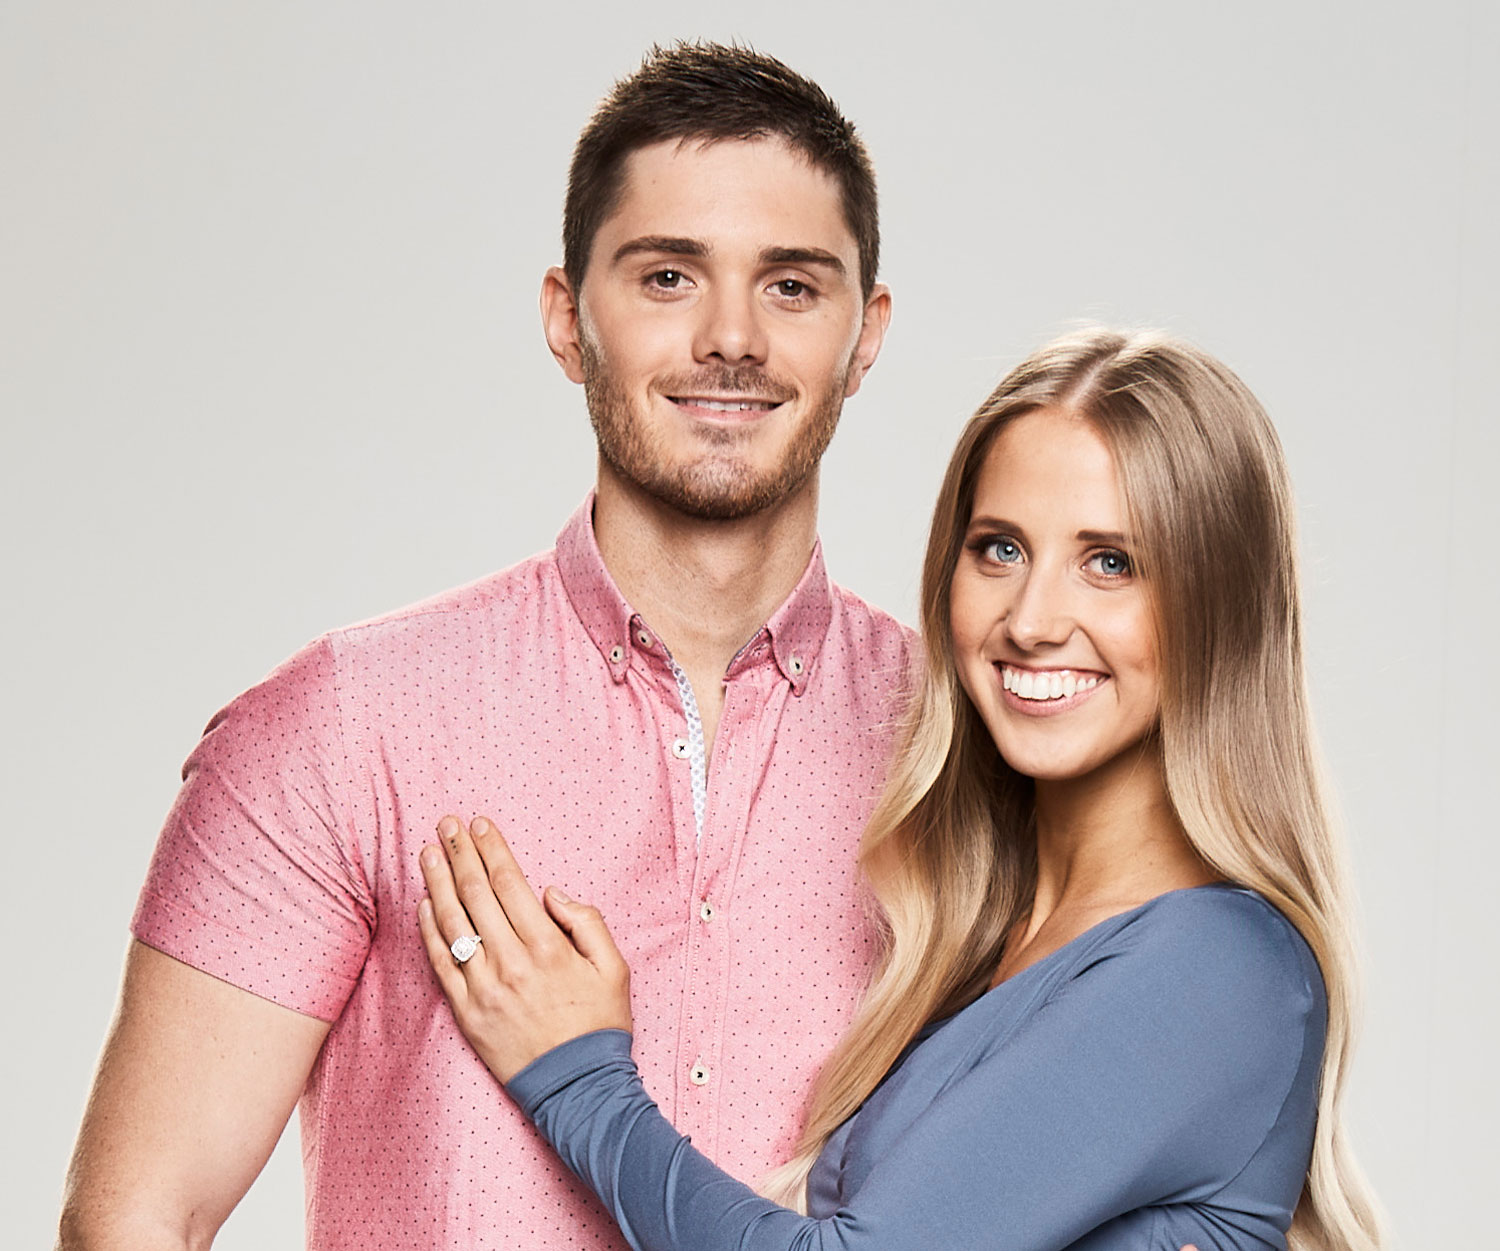 Meet The Super Switch couples participating in the experiment